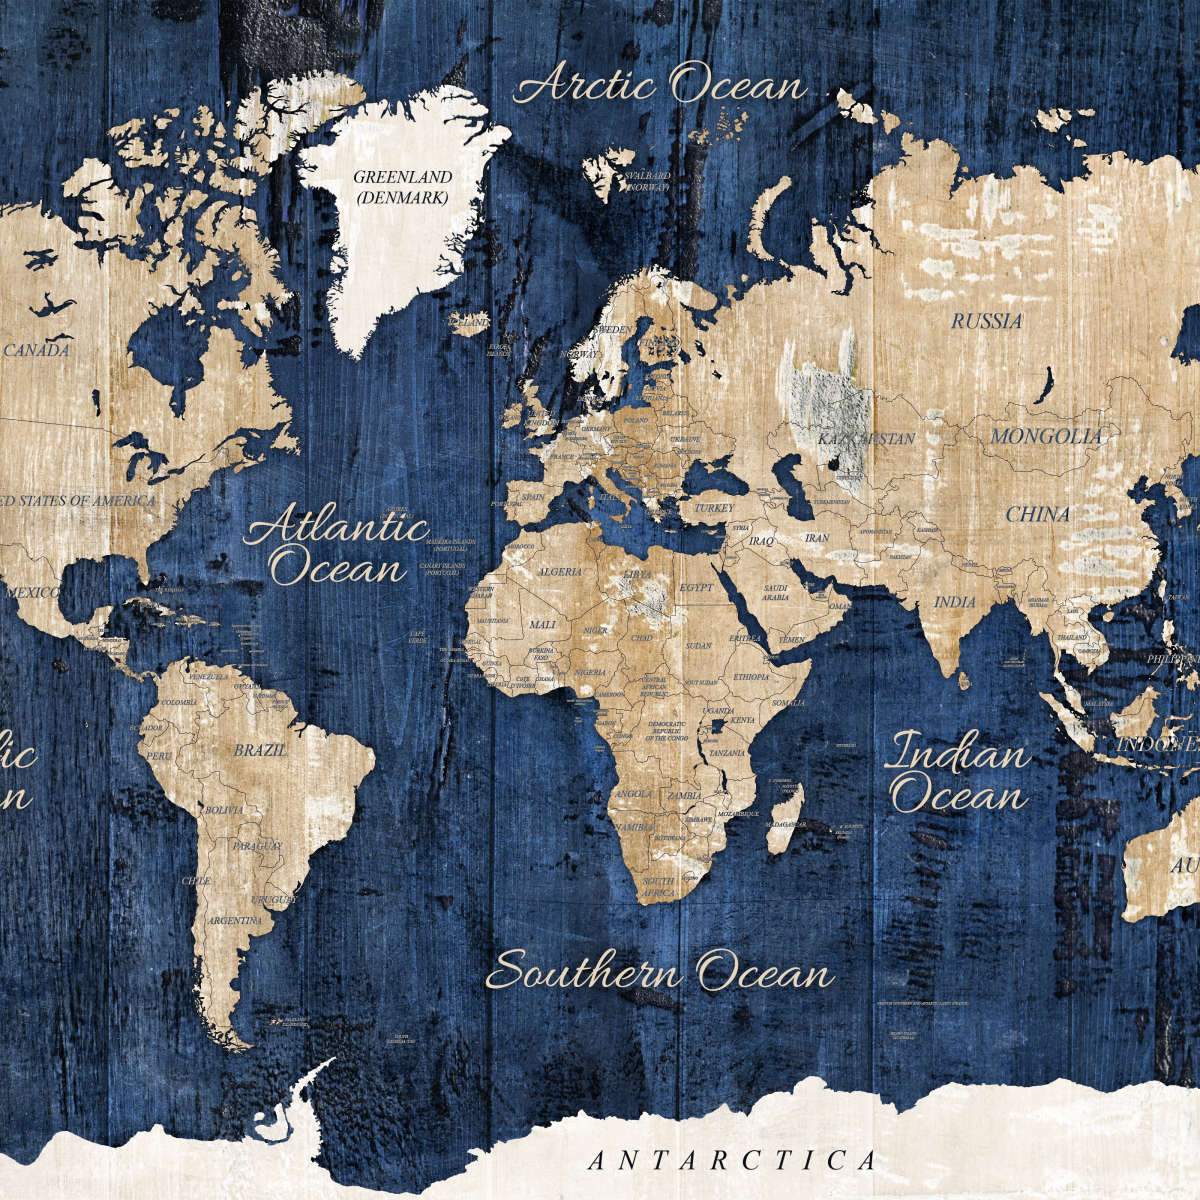 wall size world map poster